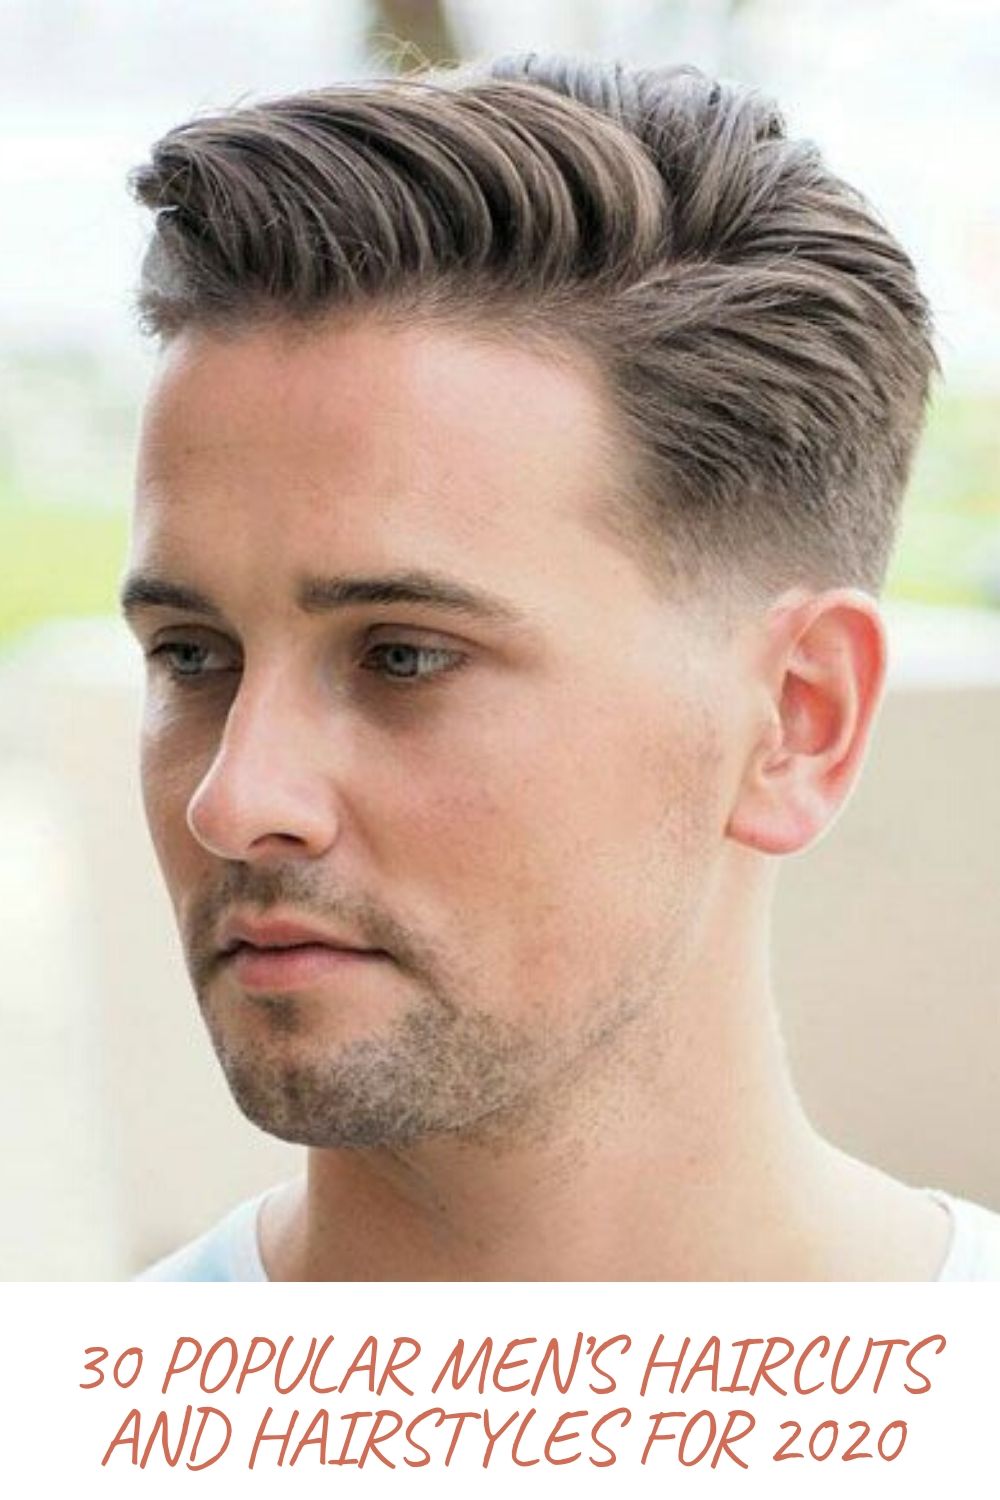 30 POPULAR MEN’S HAIRCUTS AND HAIRSTYLES FOR 2020